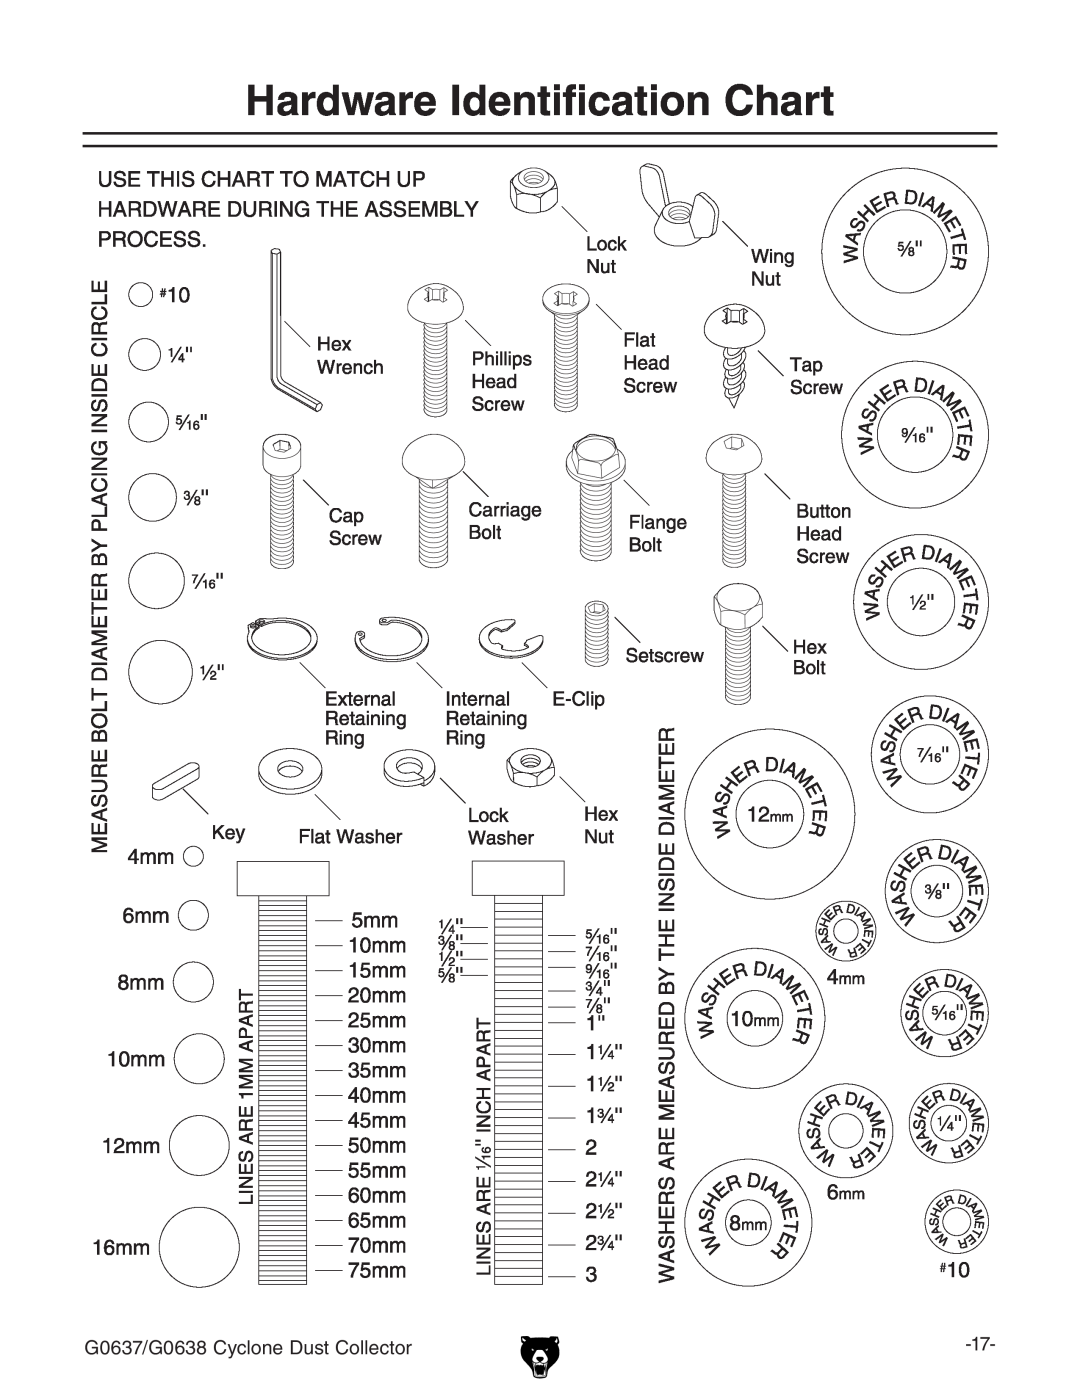 Grizzly owner manual Hardware Identification Chart, G0637/G0638 Cyclone Dust Collector 